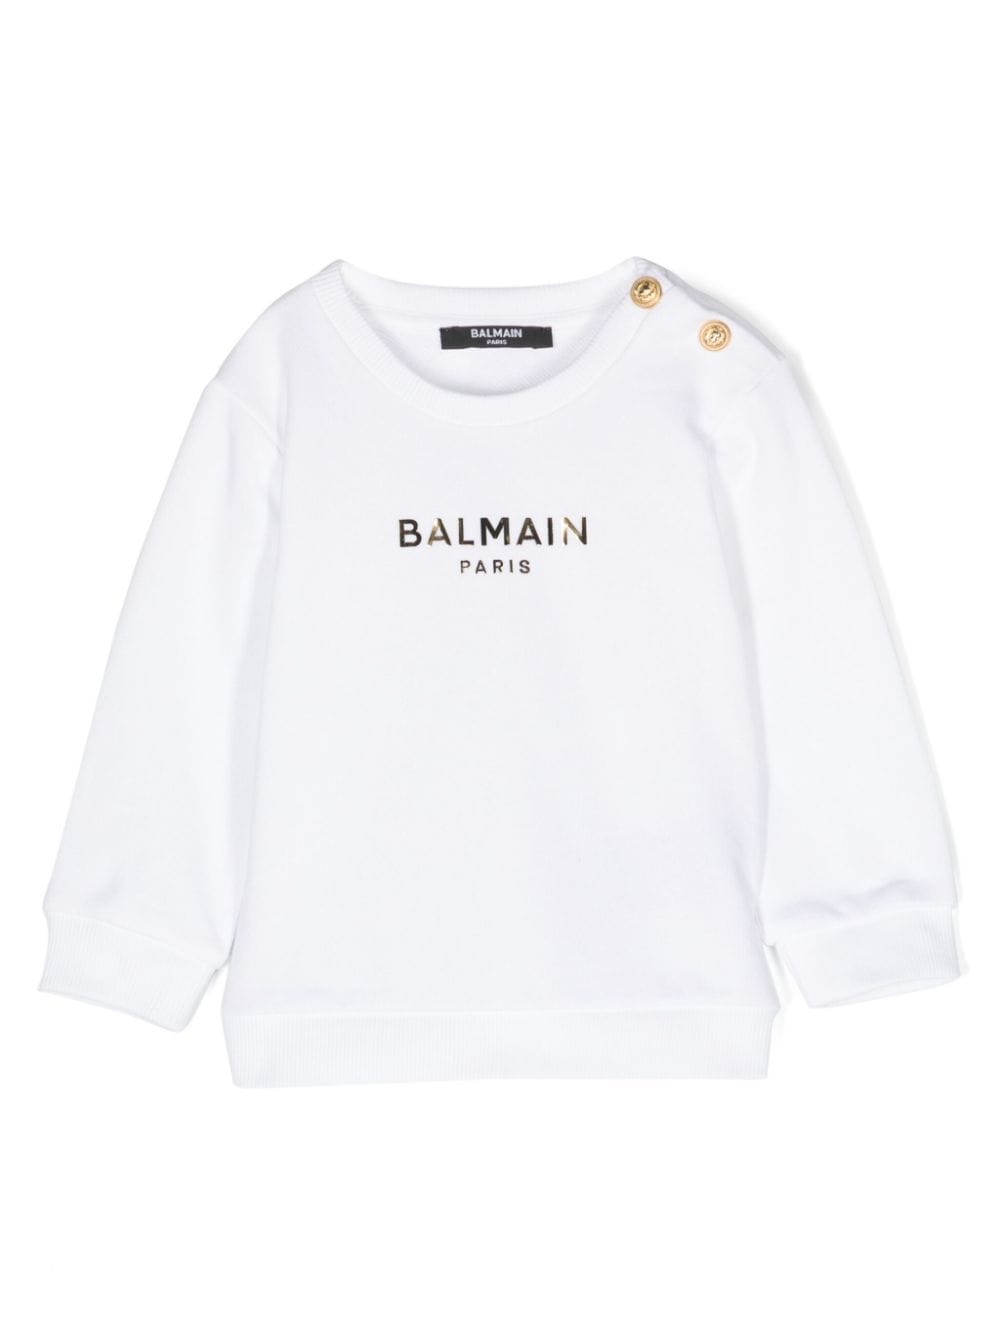 White sweatshirt for baby girls with gold logo